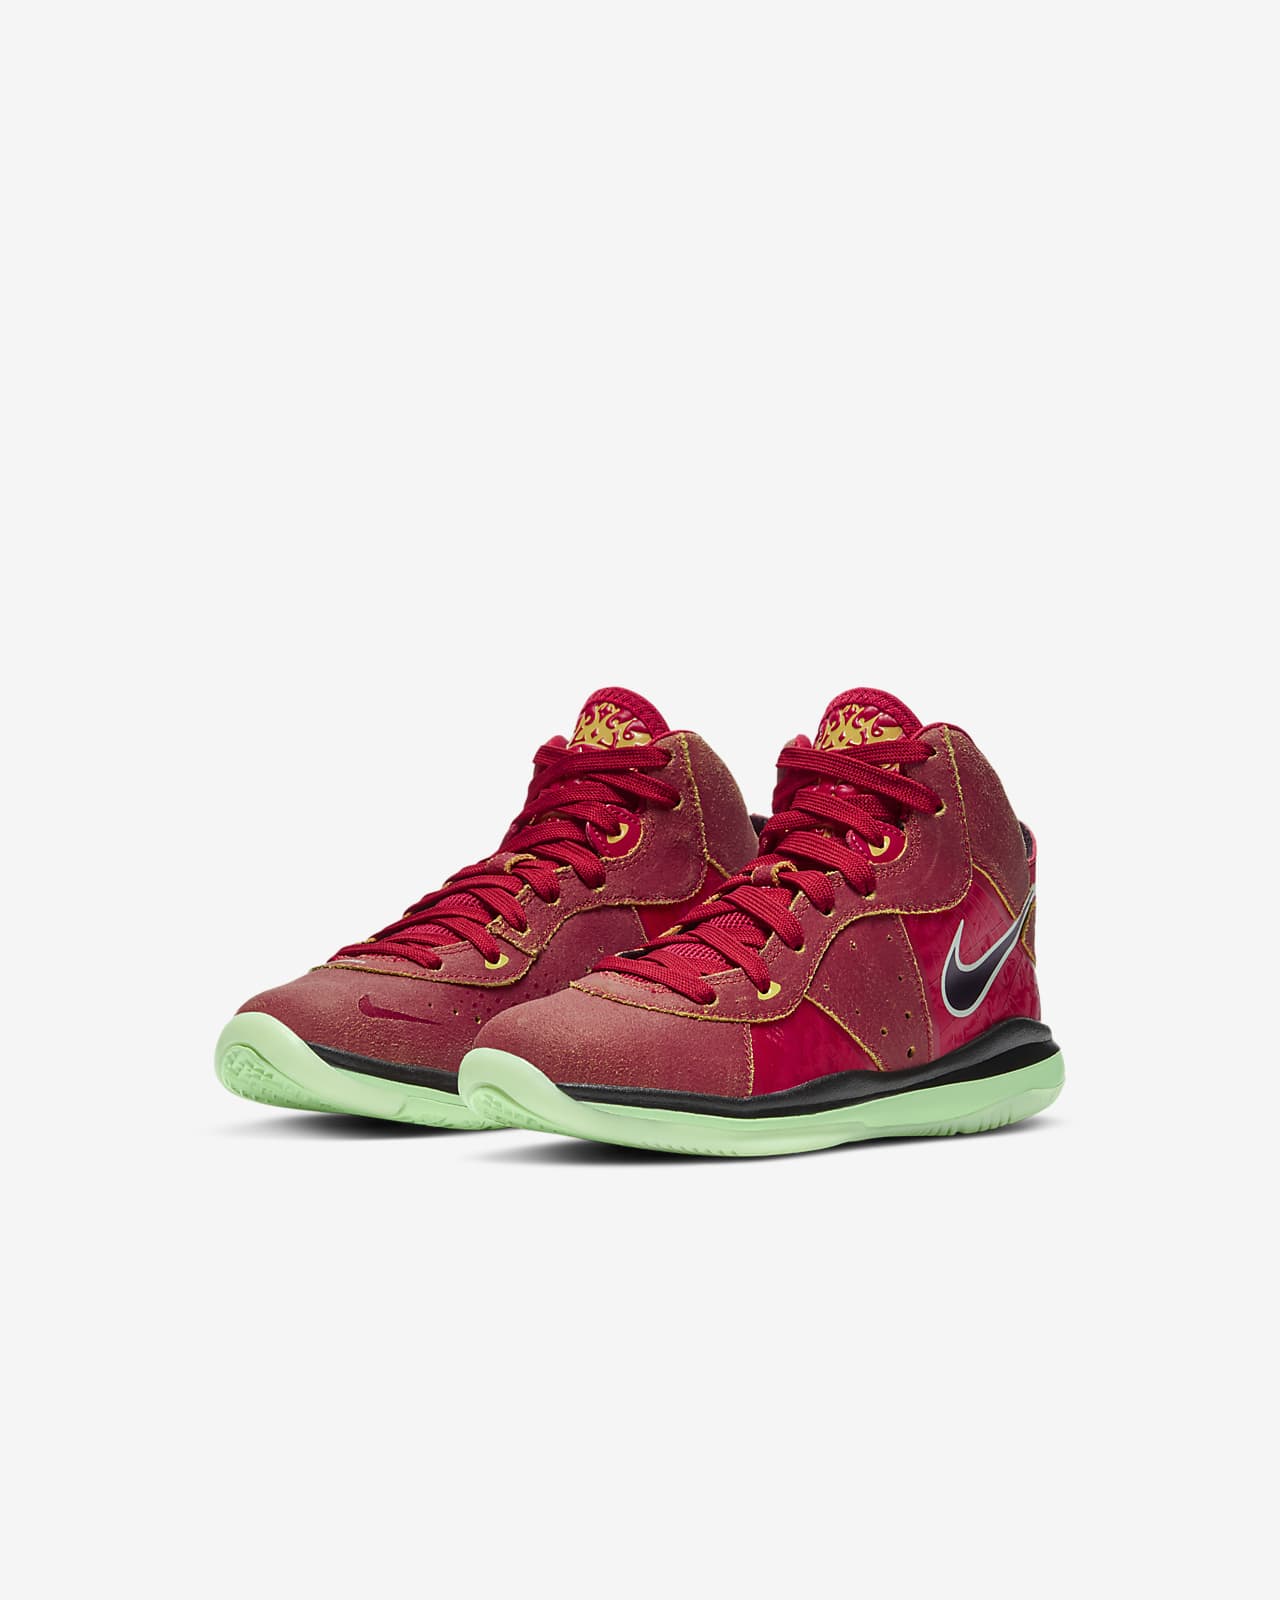 lebrons size 8